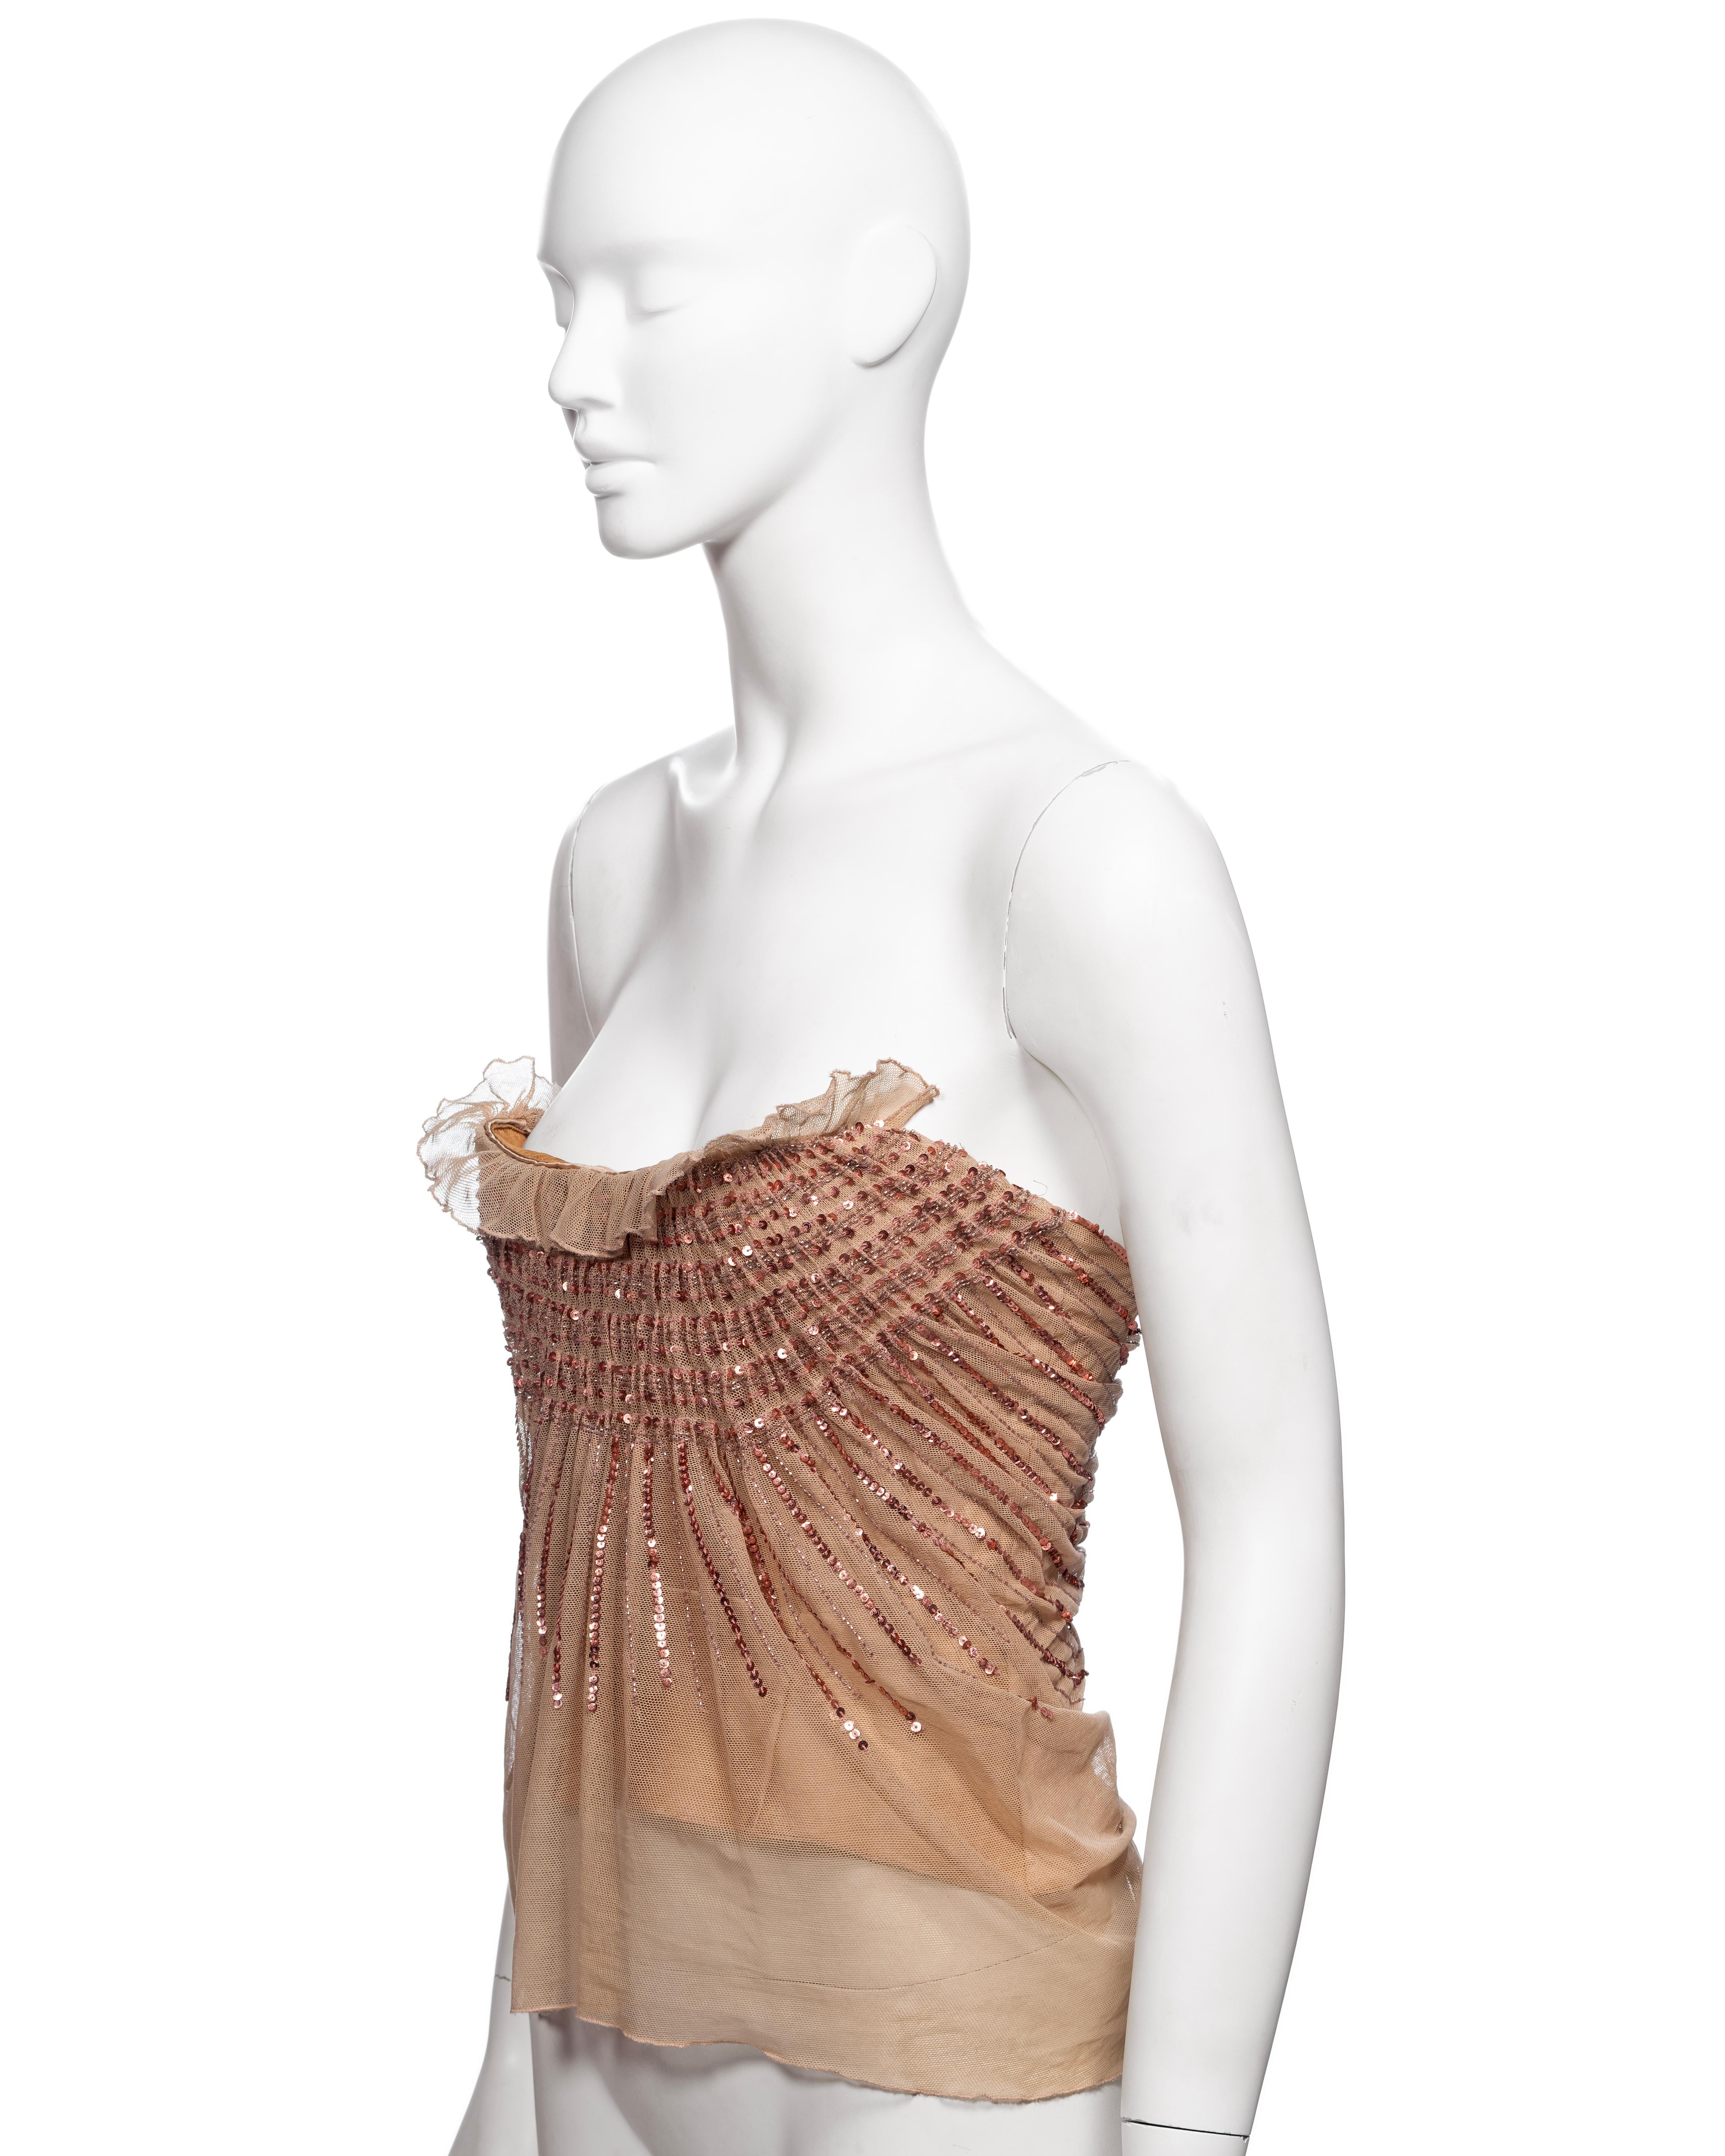 Christian Dior by John Galliano Nude Smocked Mesh and Sequin Corset Top, FW 2005 For Sale 12